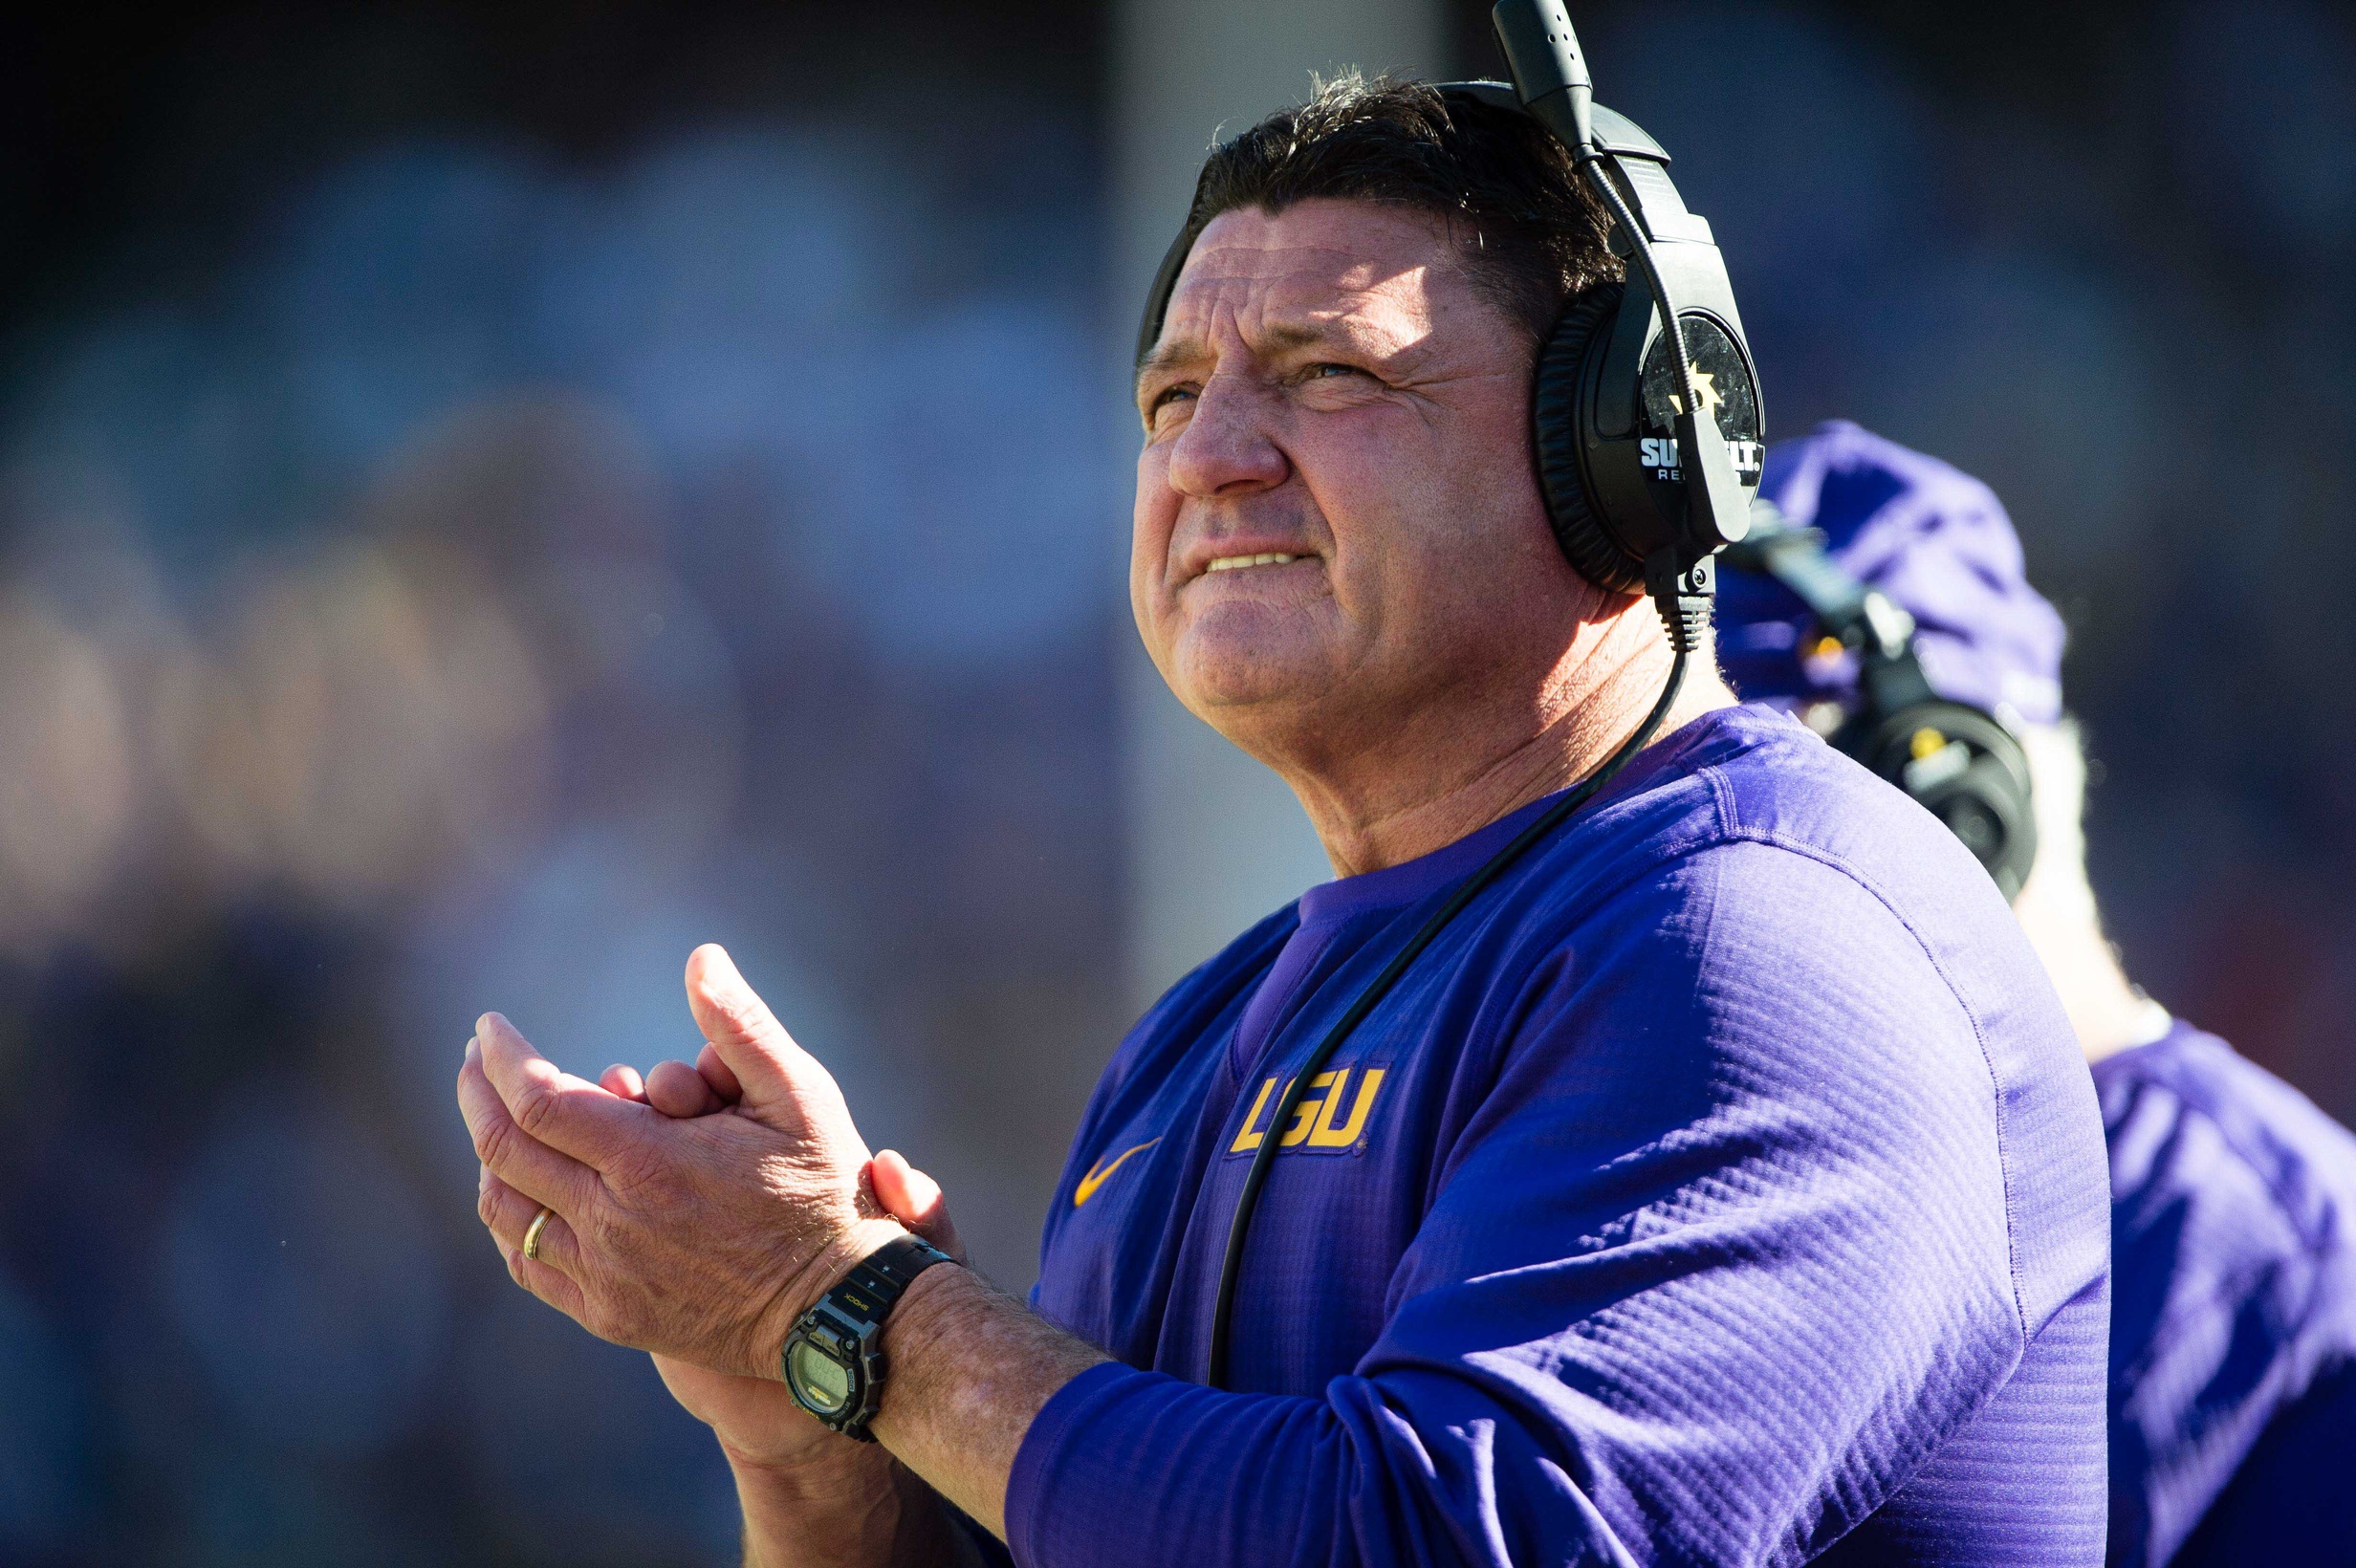 Nov 19, 2016; Baton Rouge, LA, USA; LSU Tigers interim head coach Ed Orgeron watches his team take on the Florida Gators during the game at Tiger Stadium. The Gators defeat the Tigers 16-10. Mandatory Credit: Jerome Miron-USA TODAY Sports